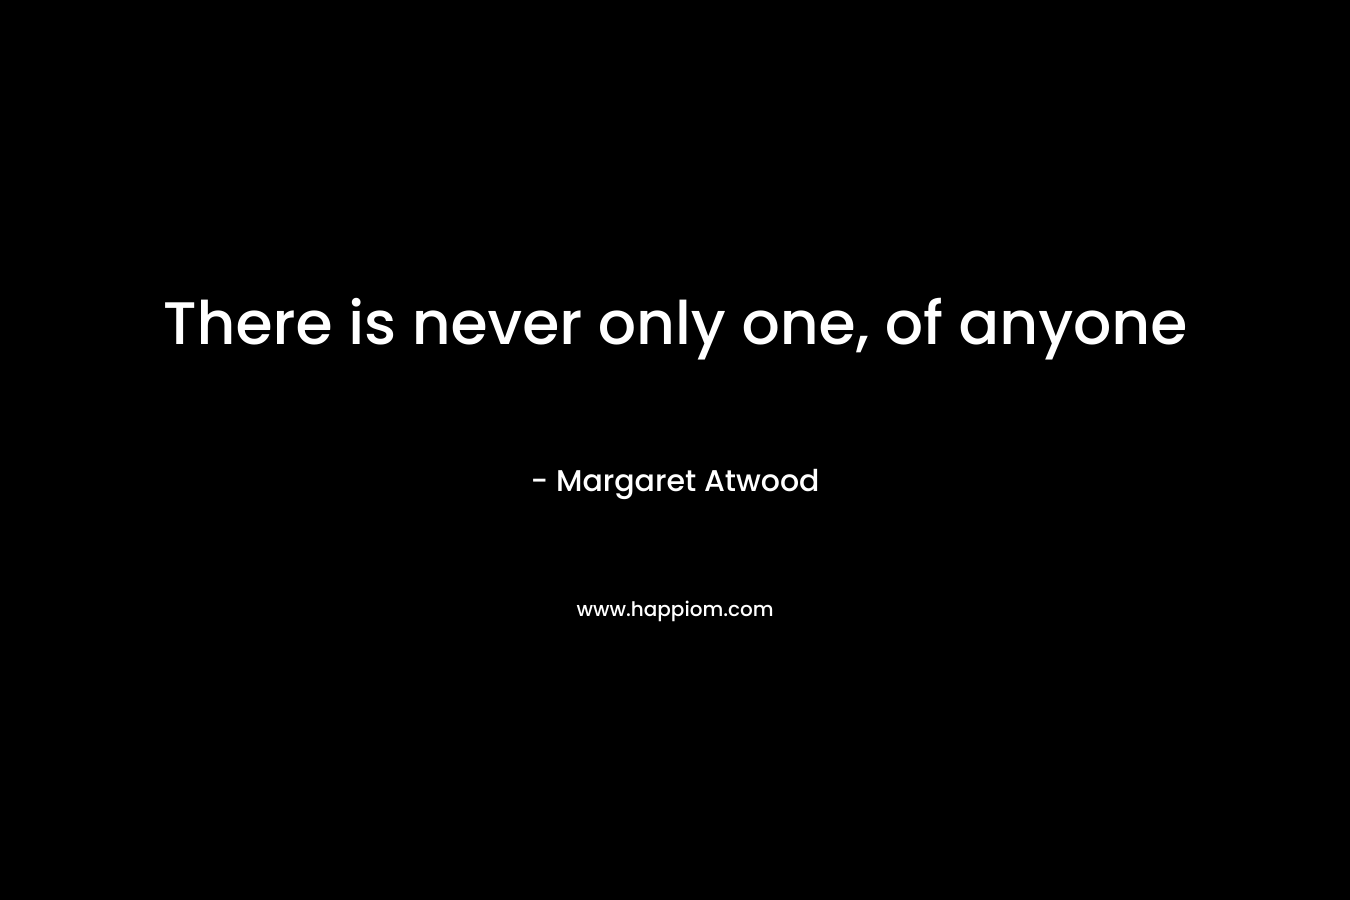 There is never only one, of anyone